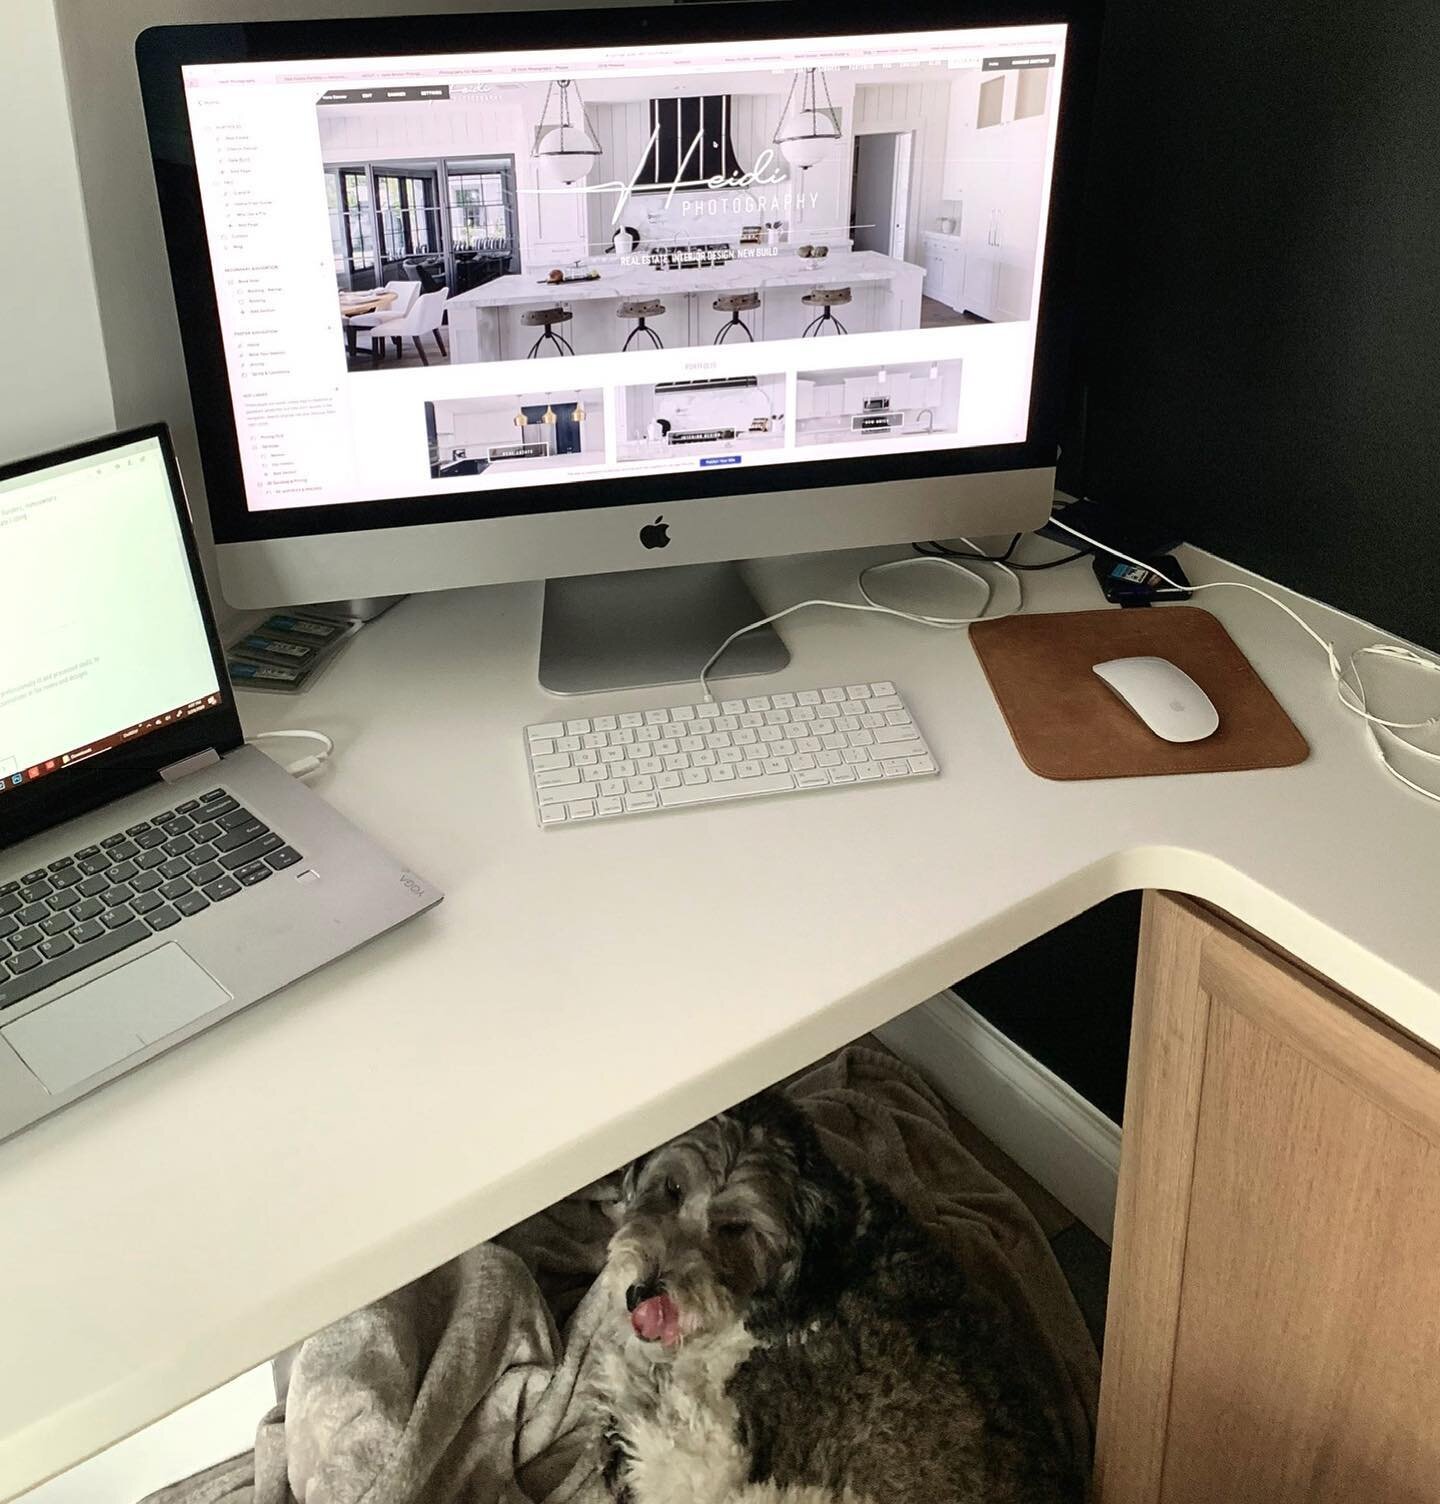 A little help at my feet while I work on my new website😉🐶 #workfromhome #enjoyingthemoment